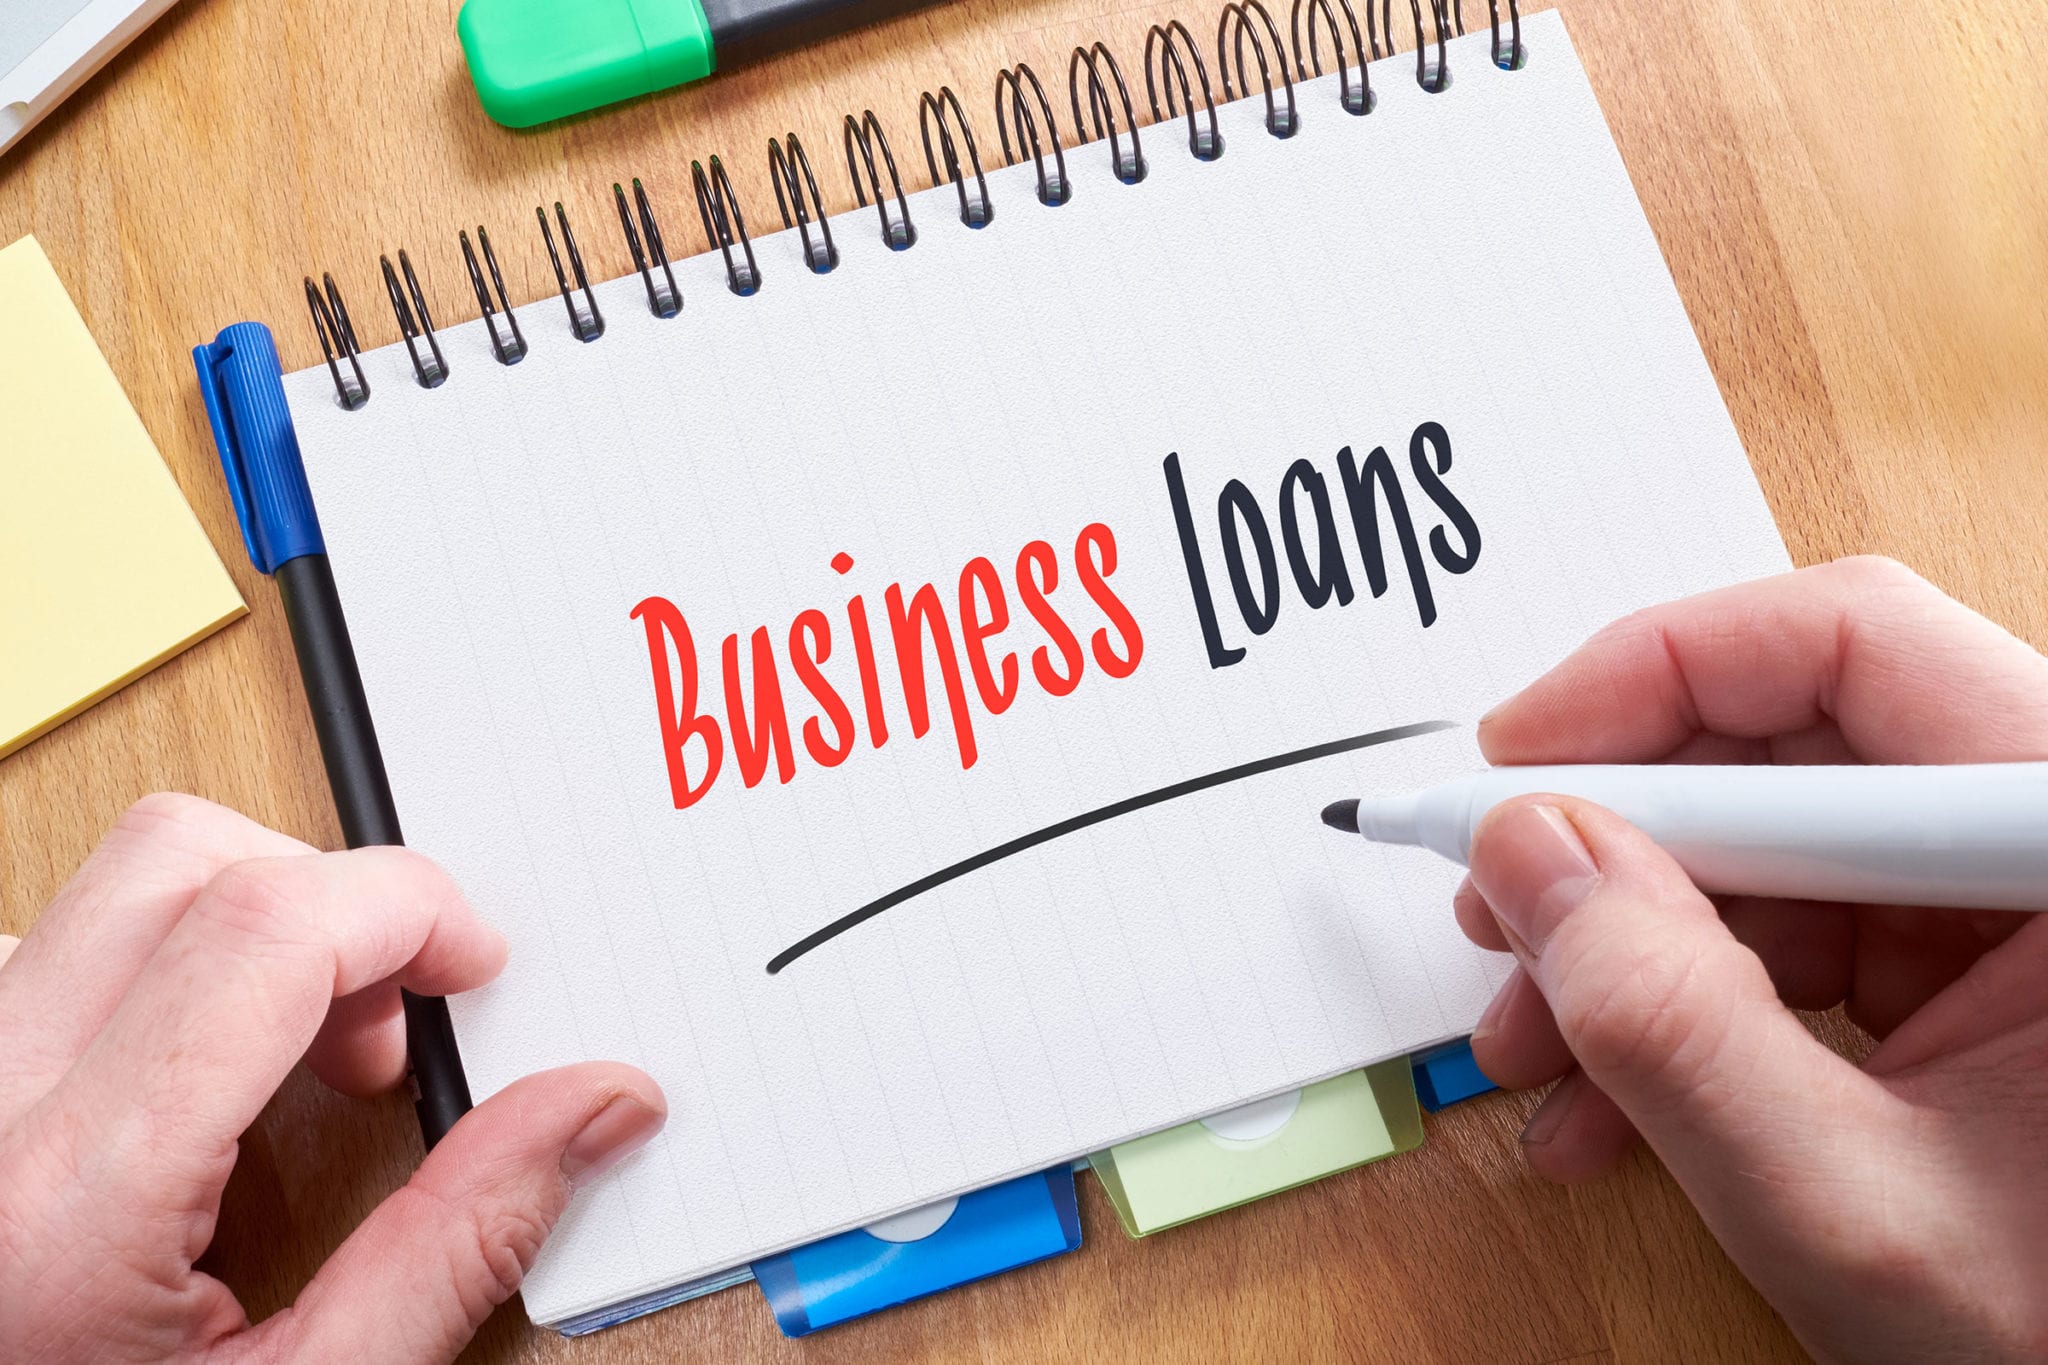 small business loans for realtors
